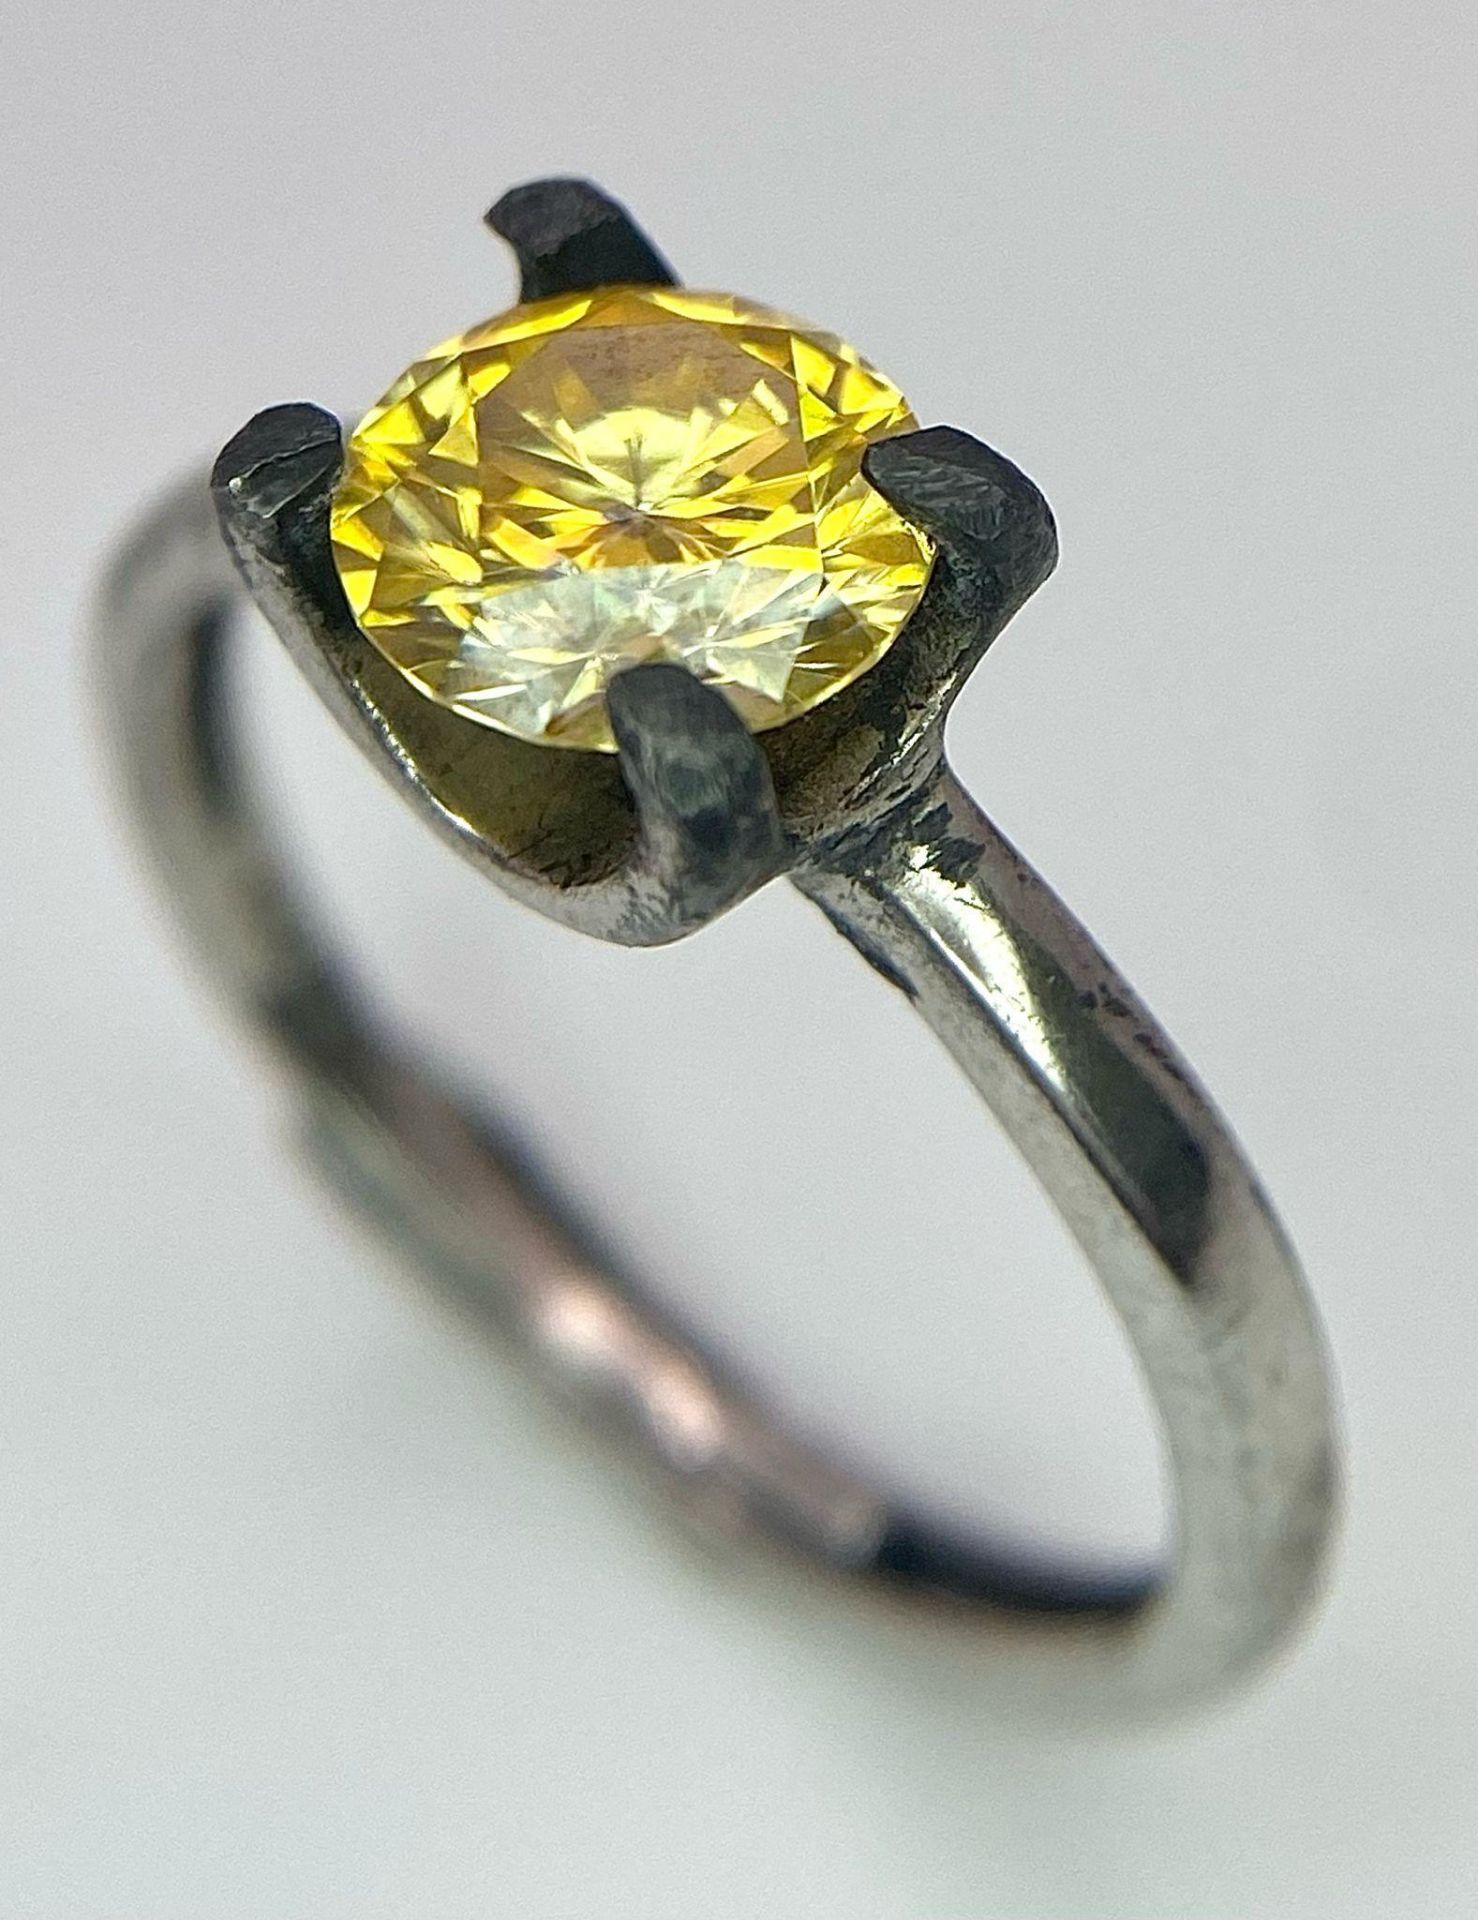 A 1ct Yellow Moissanite Solitaire Ring - Set in 925 Silver. Comes with a GRA certificate. Size L.